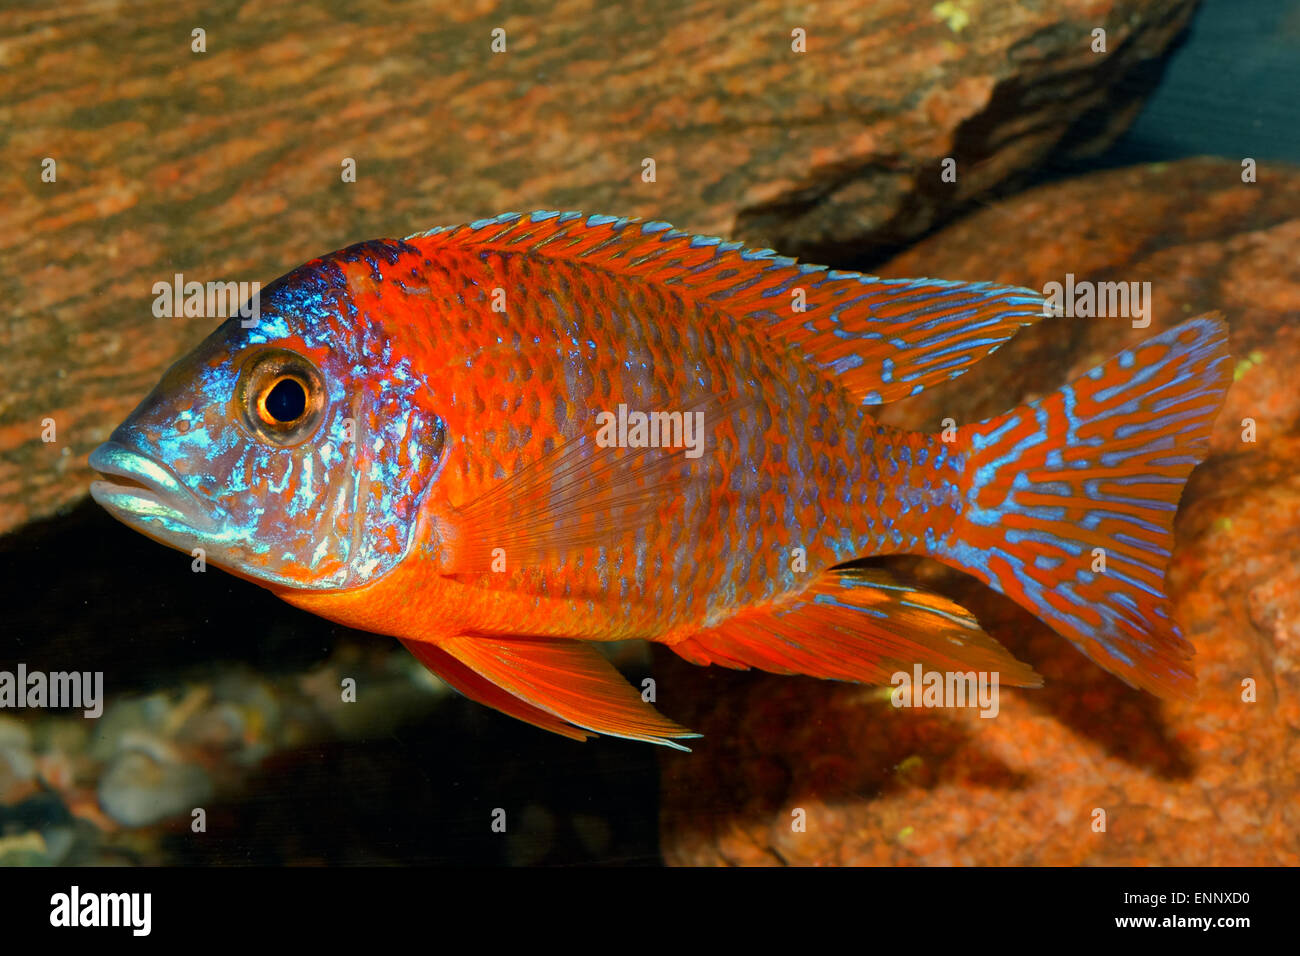 Male of cichlid fish from genus Aulonocara. Stock Photo